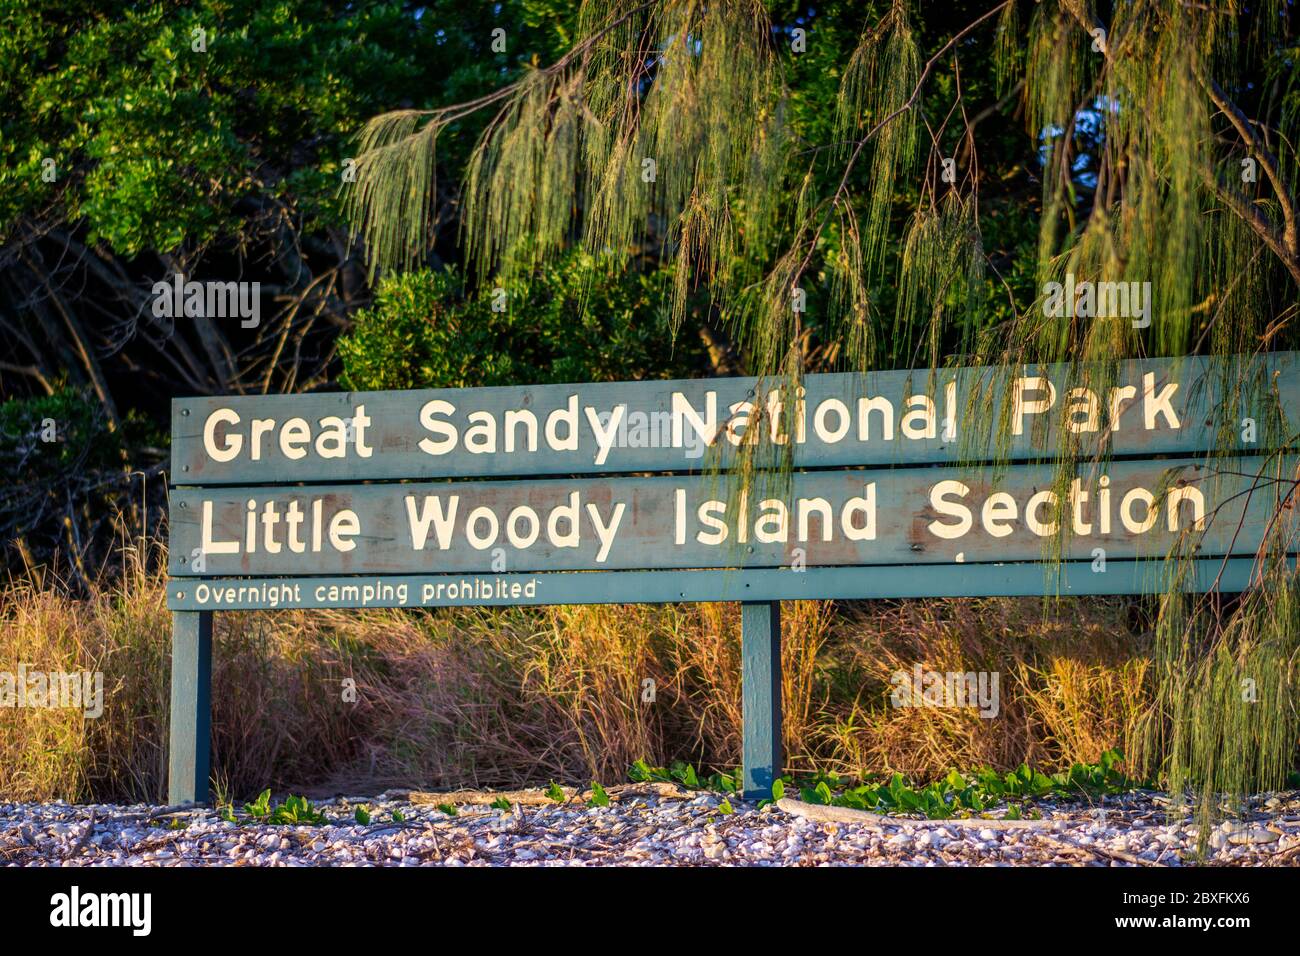 National Parks sign, Little Woody Island, Queensland Australia Stock Photo